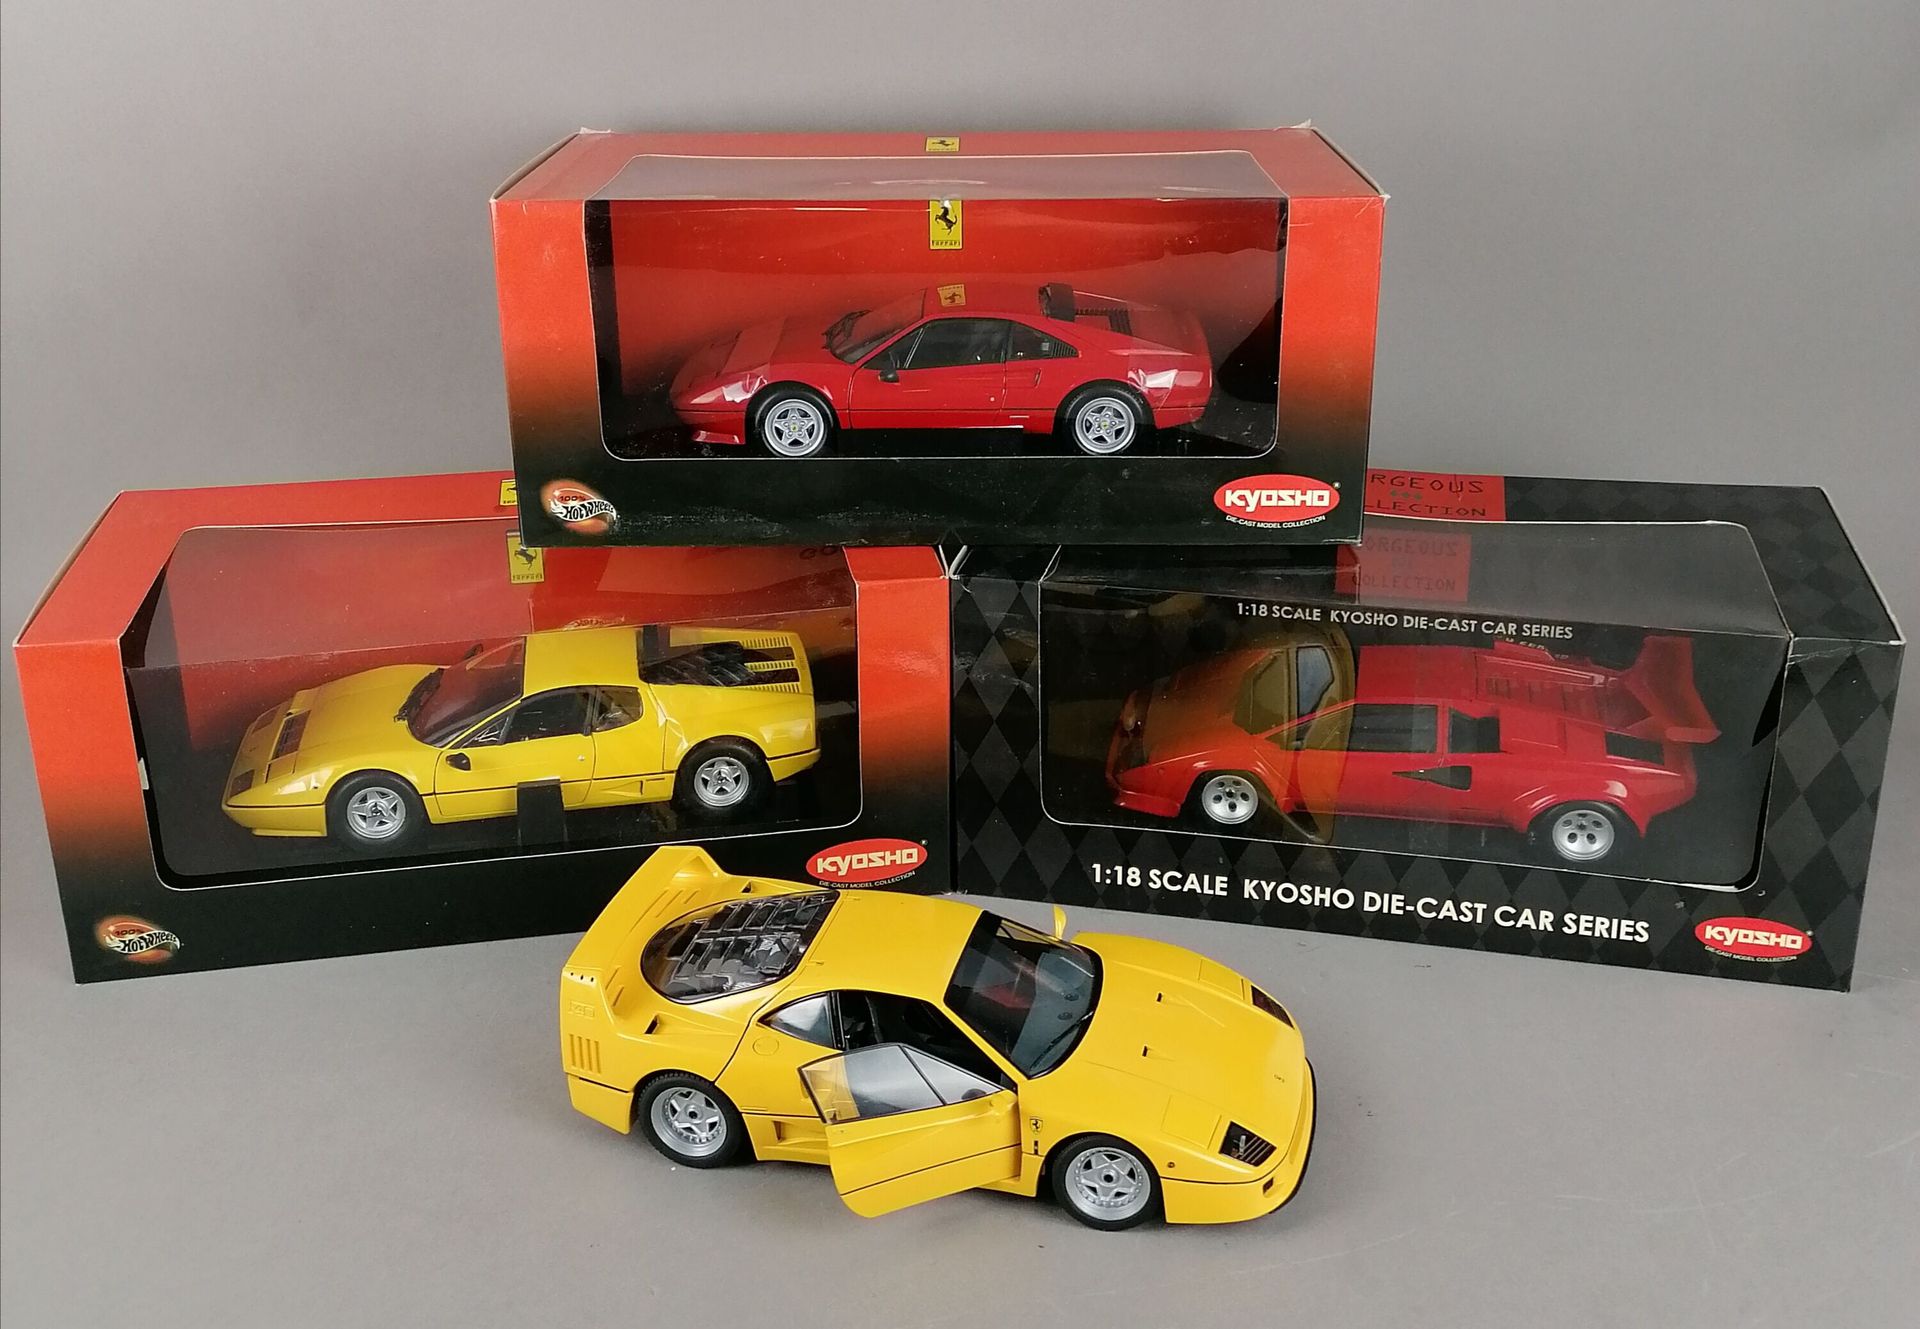 Null KYOSHO - FOUR CARS 1/18 scale:

1x Ferrari F40 yellow without box

1x Ferra&hellip;